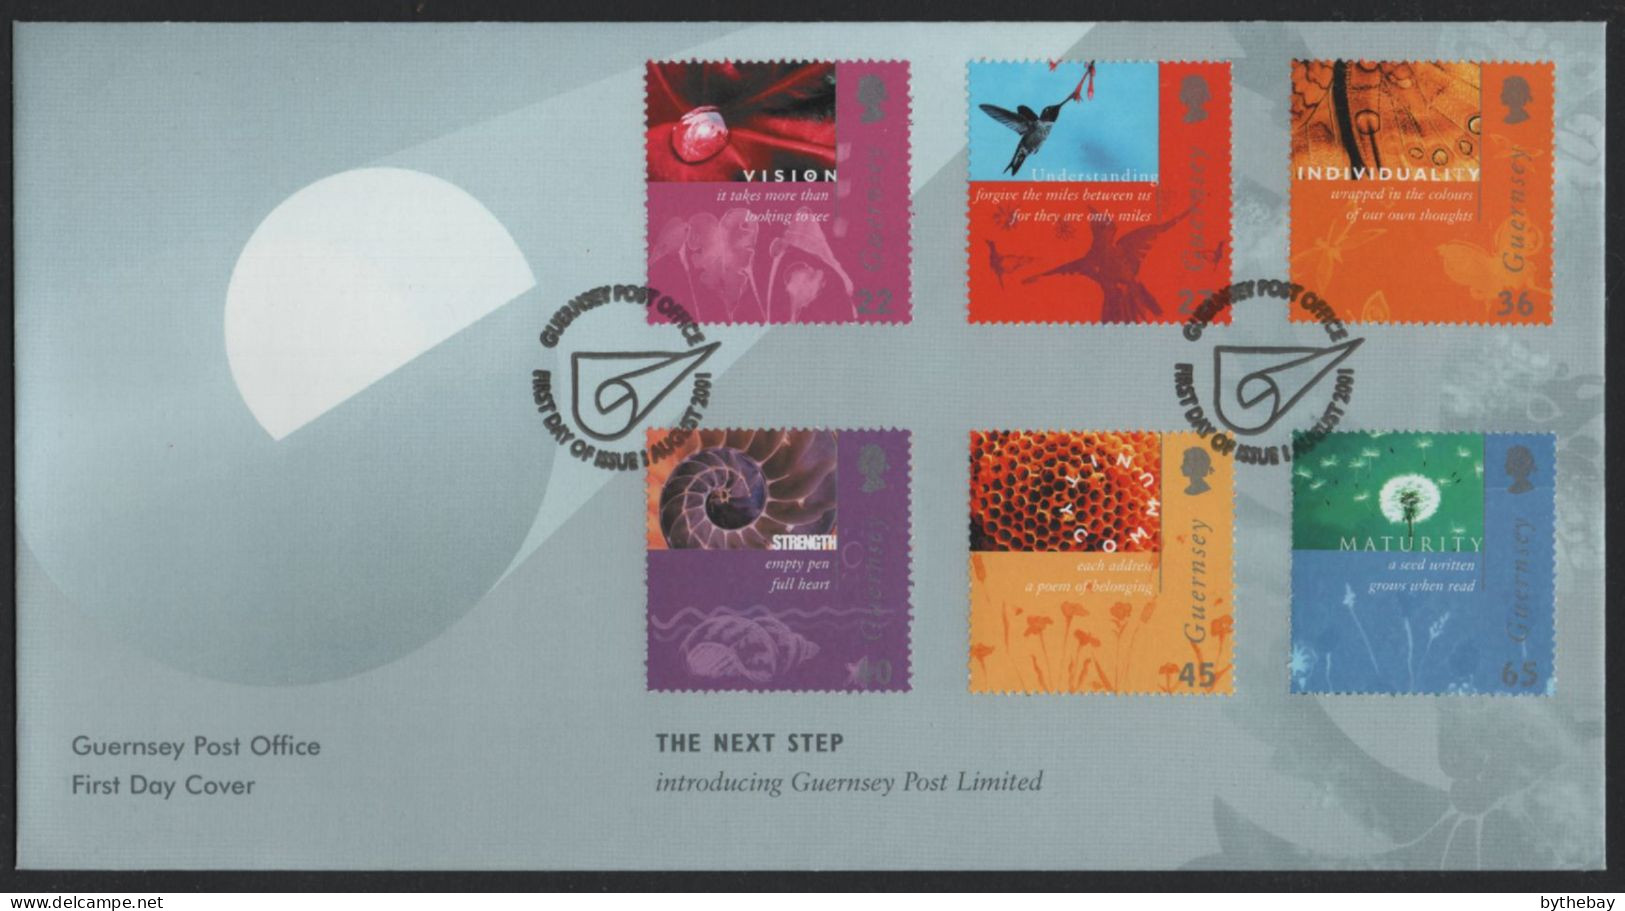 Guernsey 2001 FDC Sc 743-748 Guernsey Post Limited Introduction - Guernesey